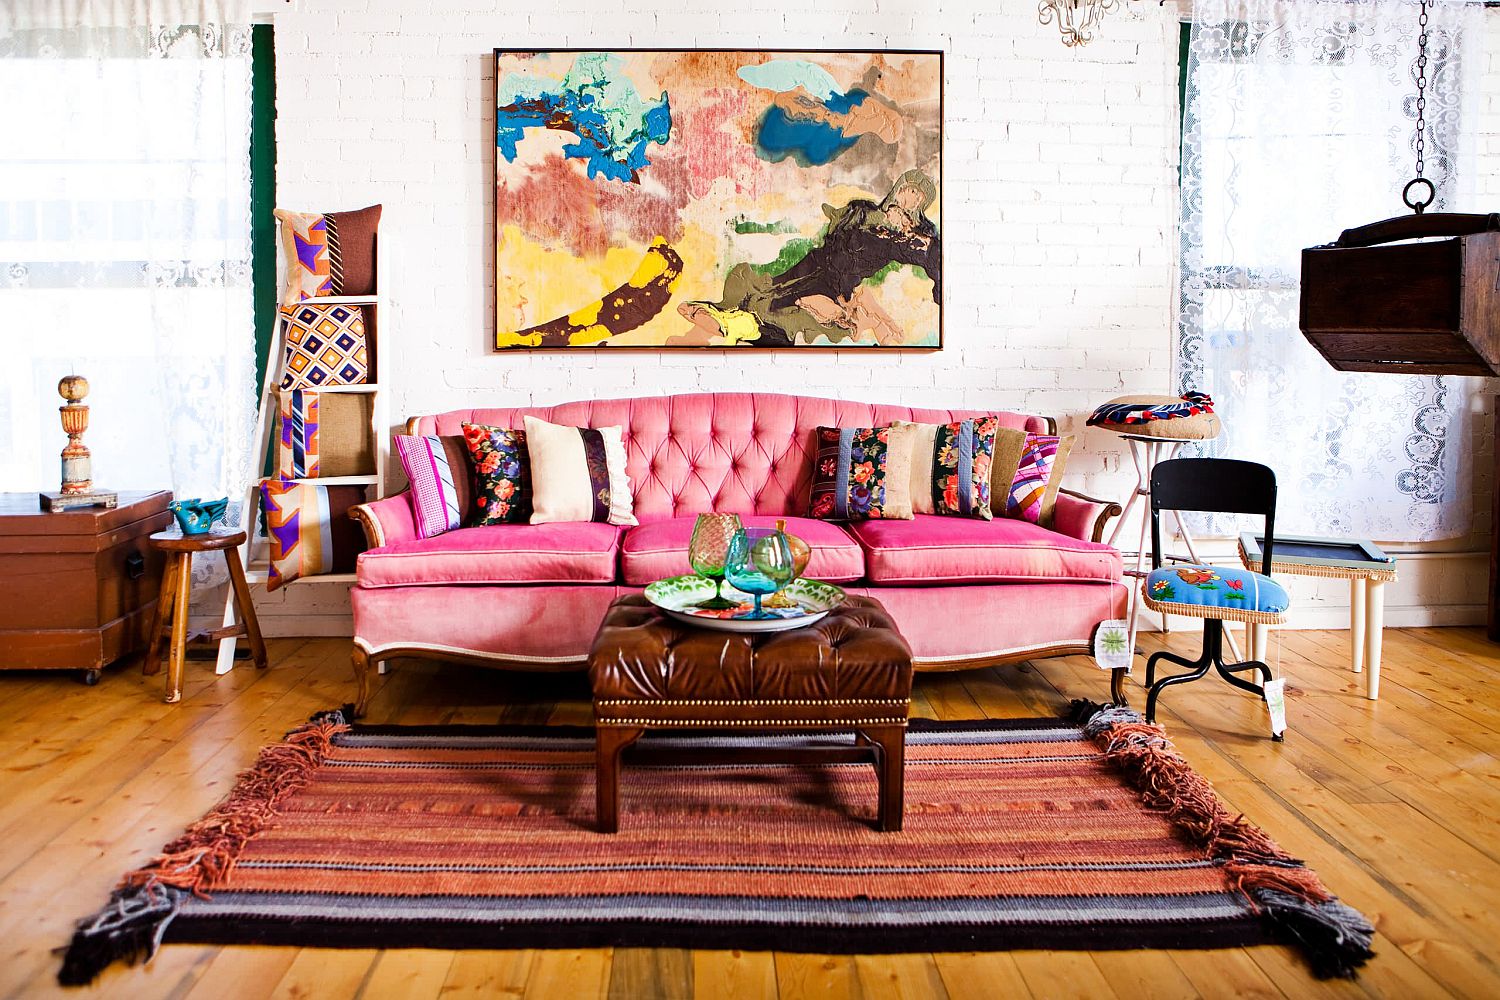 Fabulous pink sofa anchors this exquisite brick wall living room with eclectic style